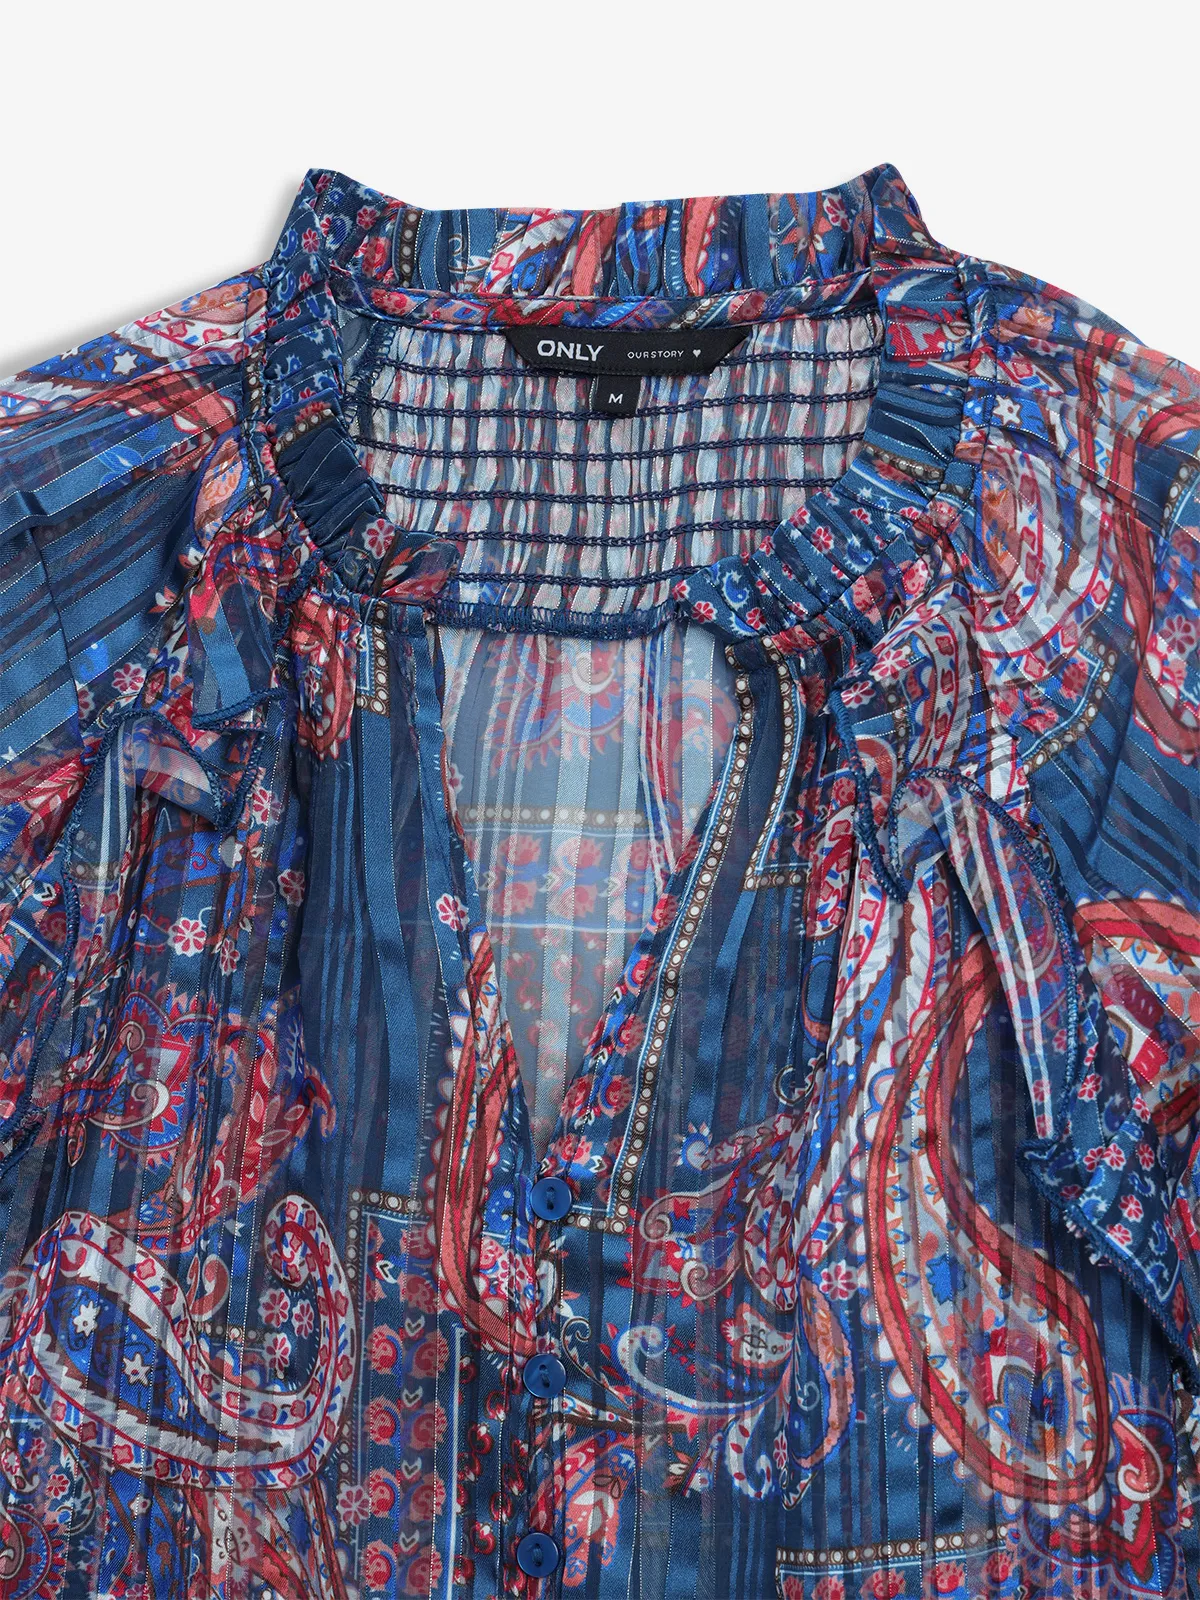 ONLY blue printed chiffon top